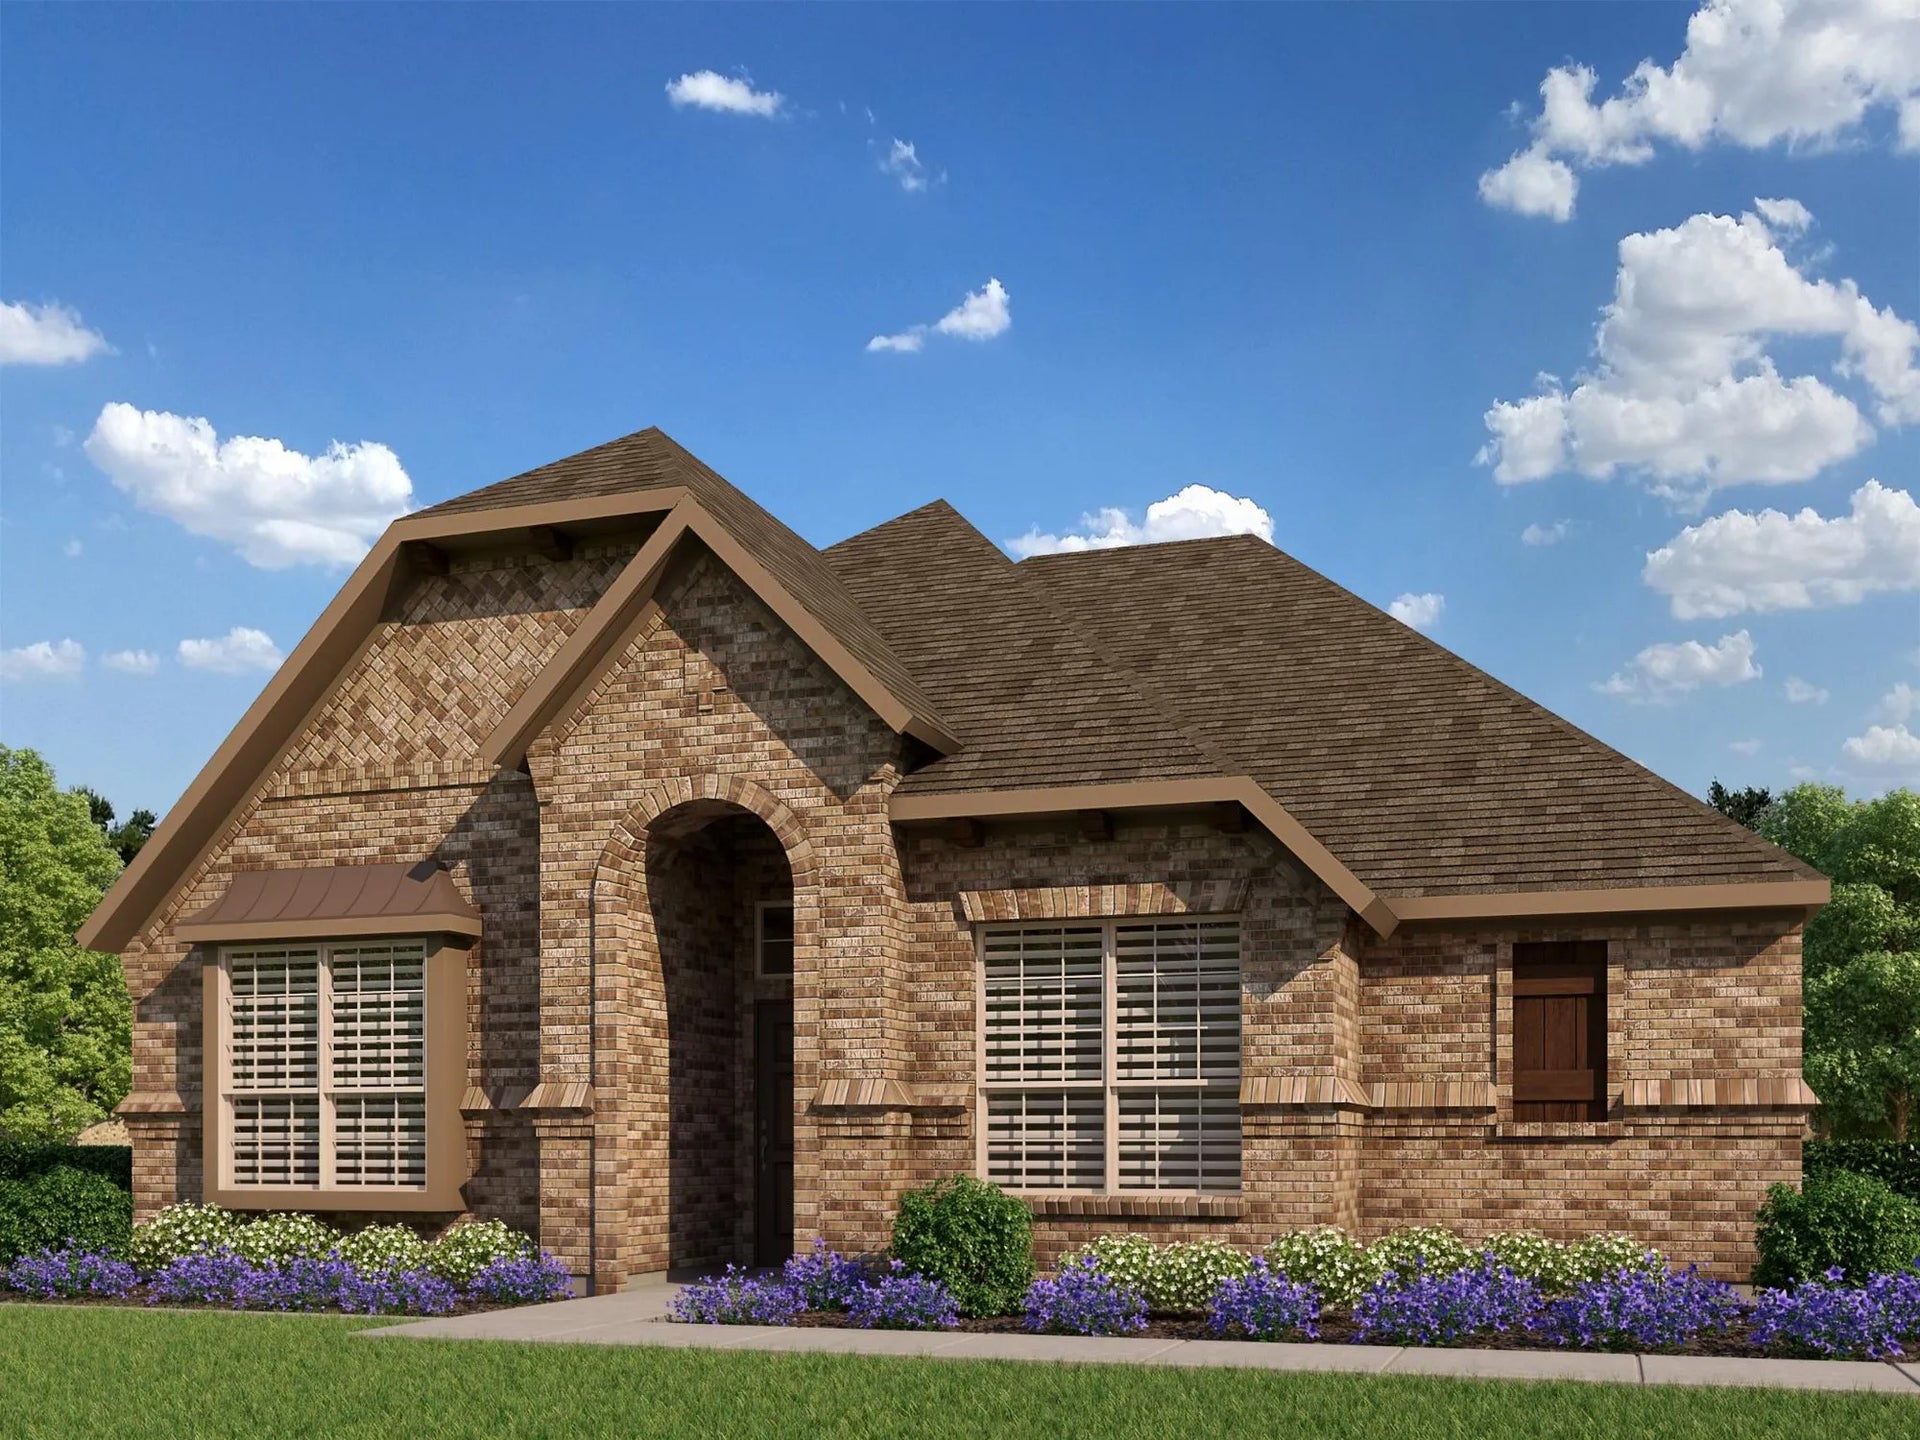 1802 C. 3br New Home in Heartland, TX